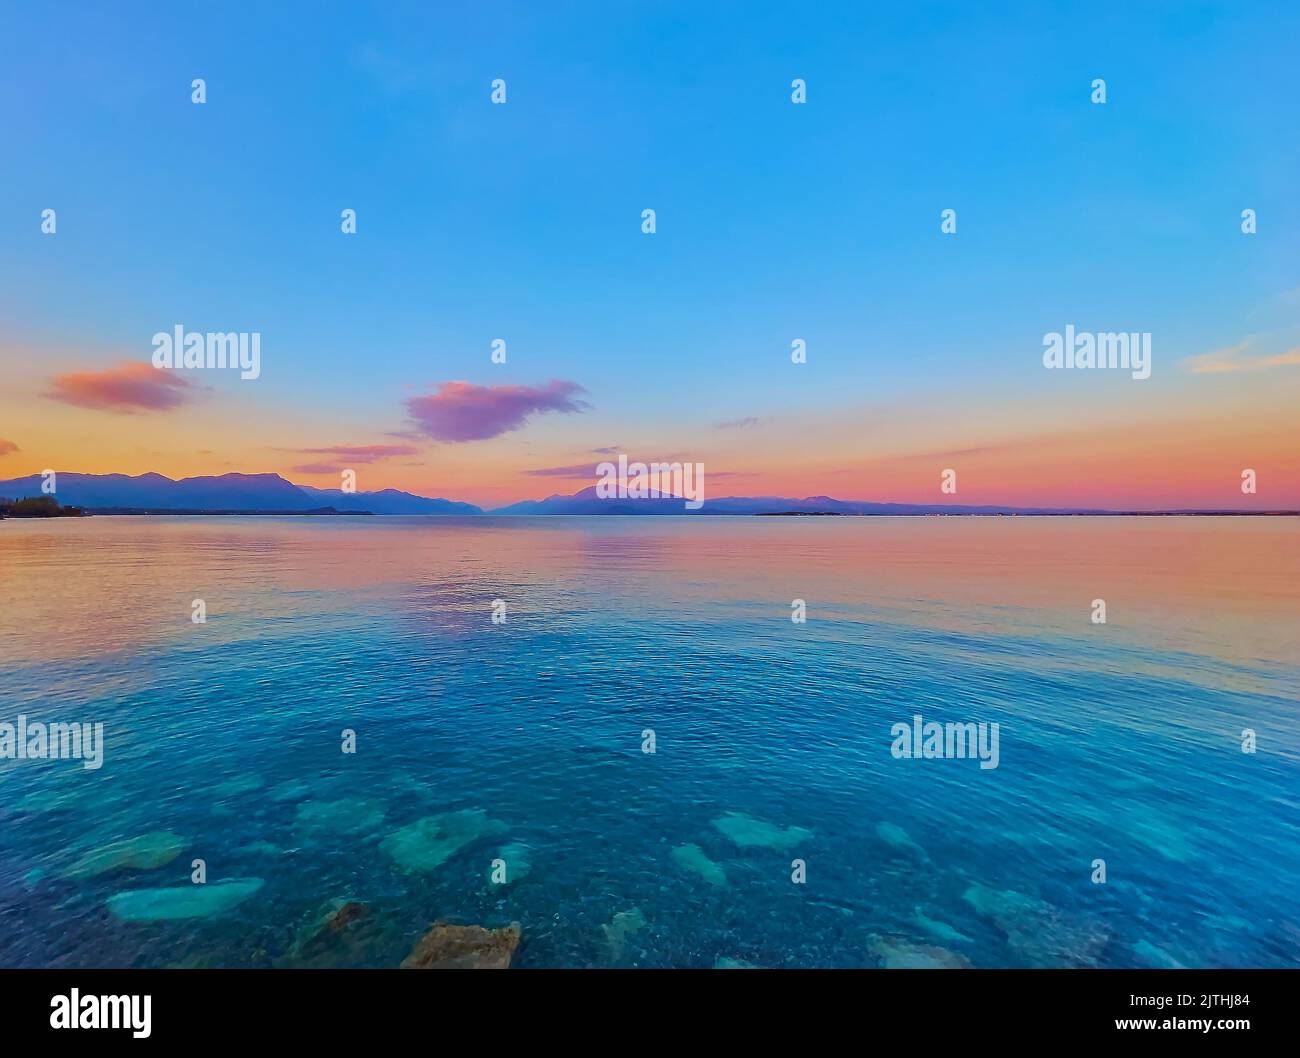 The picturesque sunset over Lake Garda with scenic rippled surface and silhouettes of Garda Prealps in the background, Desenzano del Garda, Italy Stock Photo